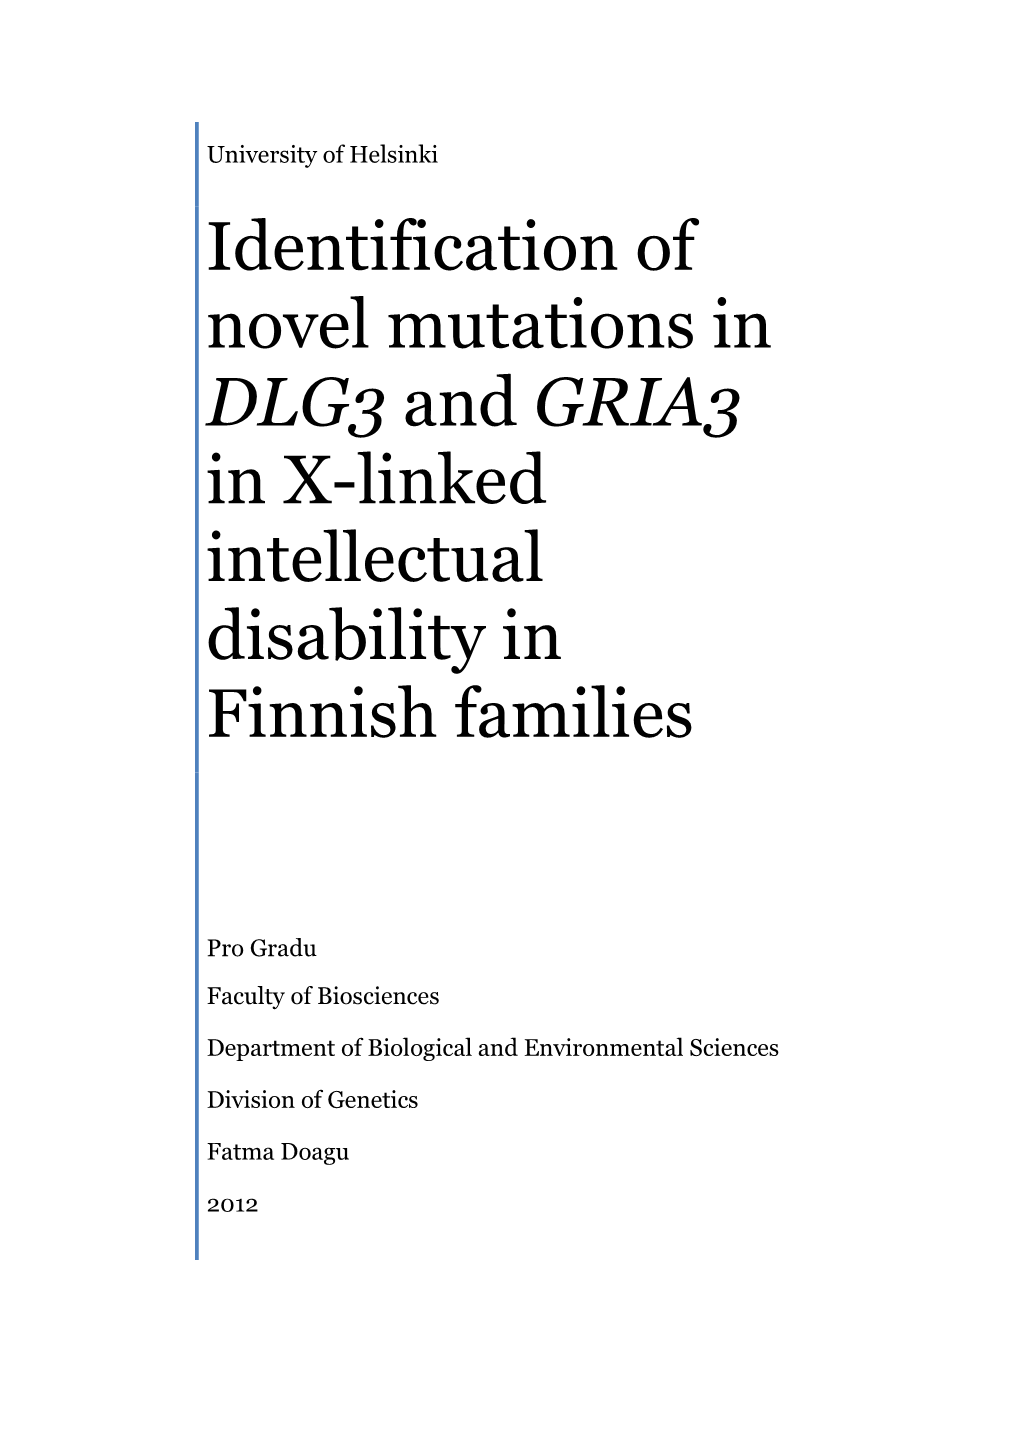 Identification of Novel Mutations in DLG3 and GRIA3 in X-Linked Intellectual Disability in Finnish Families